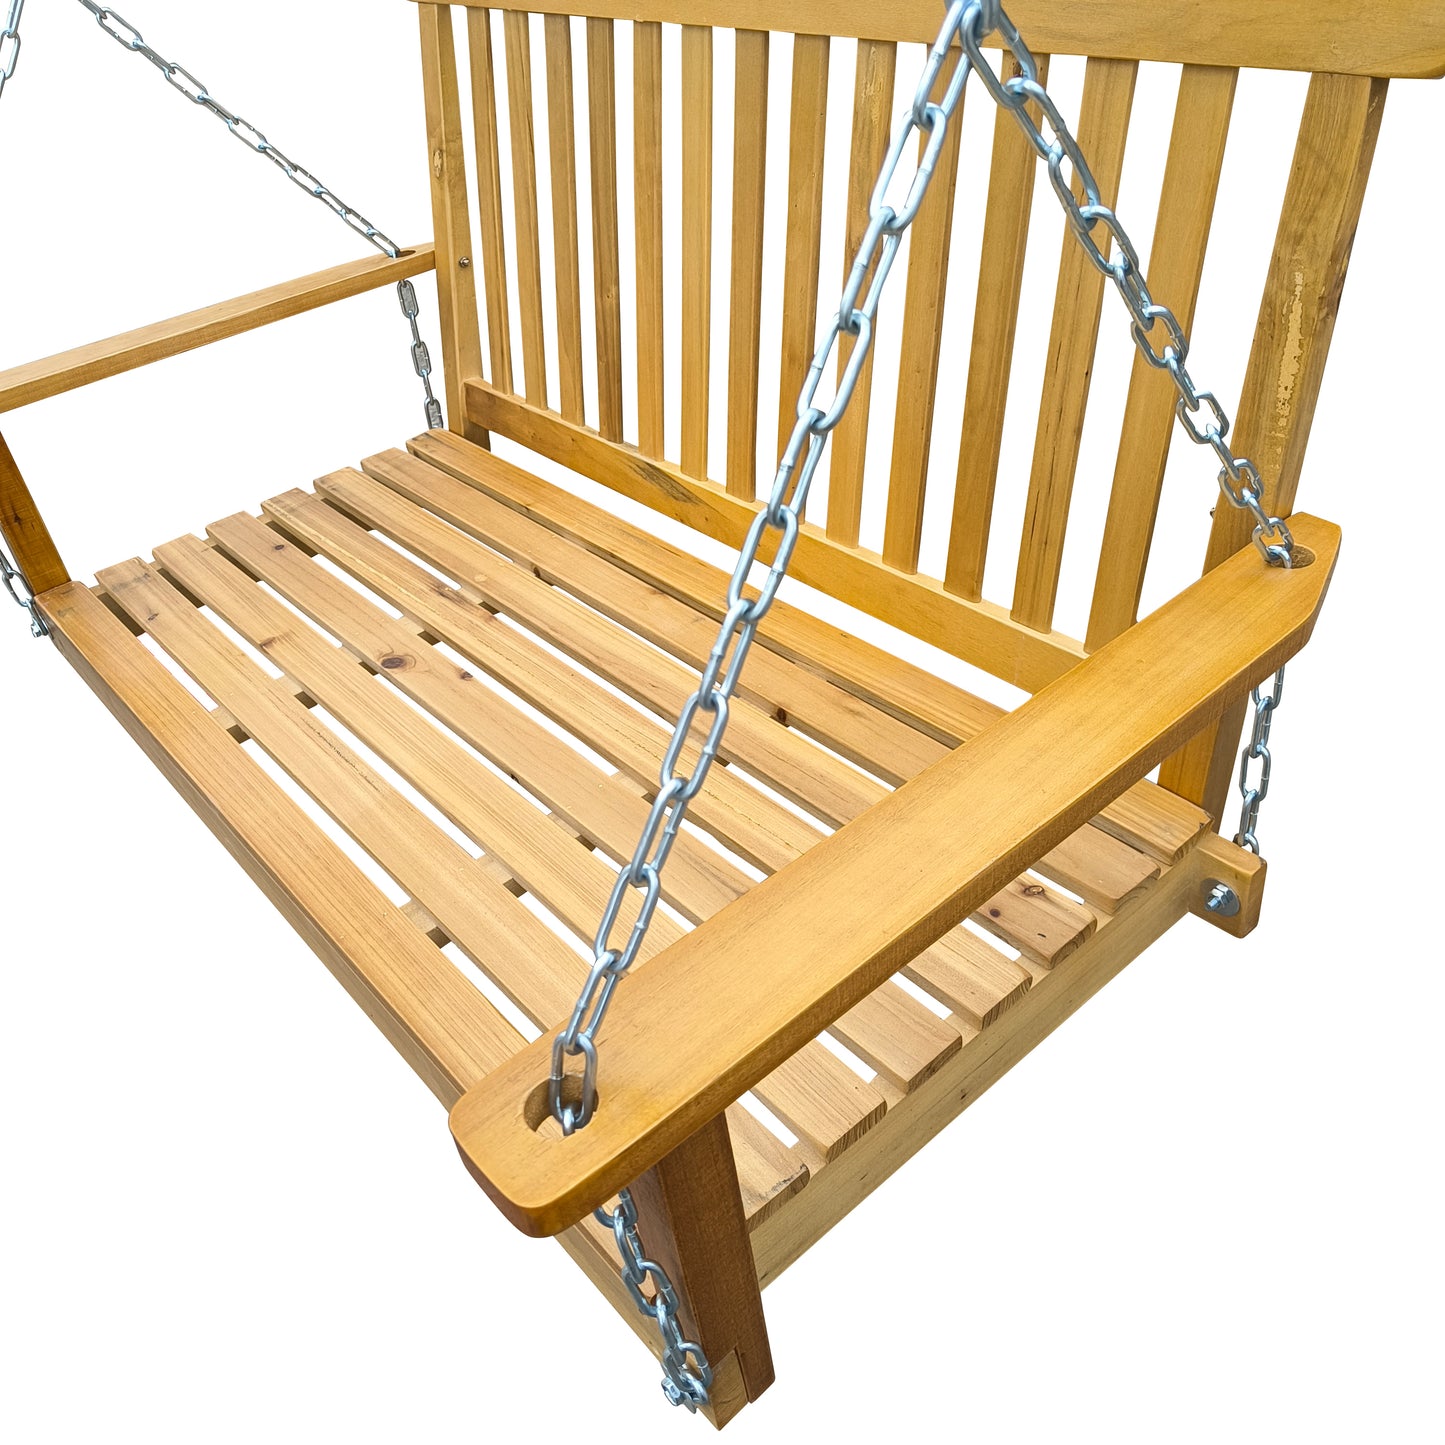 Front Porch Swing with Armrests, Wood Bench Swing with Hanging Chains,for Outdoor Patio ,Garden Yard, porch, backyard,  or sunroom,Easy to Assemble,teak